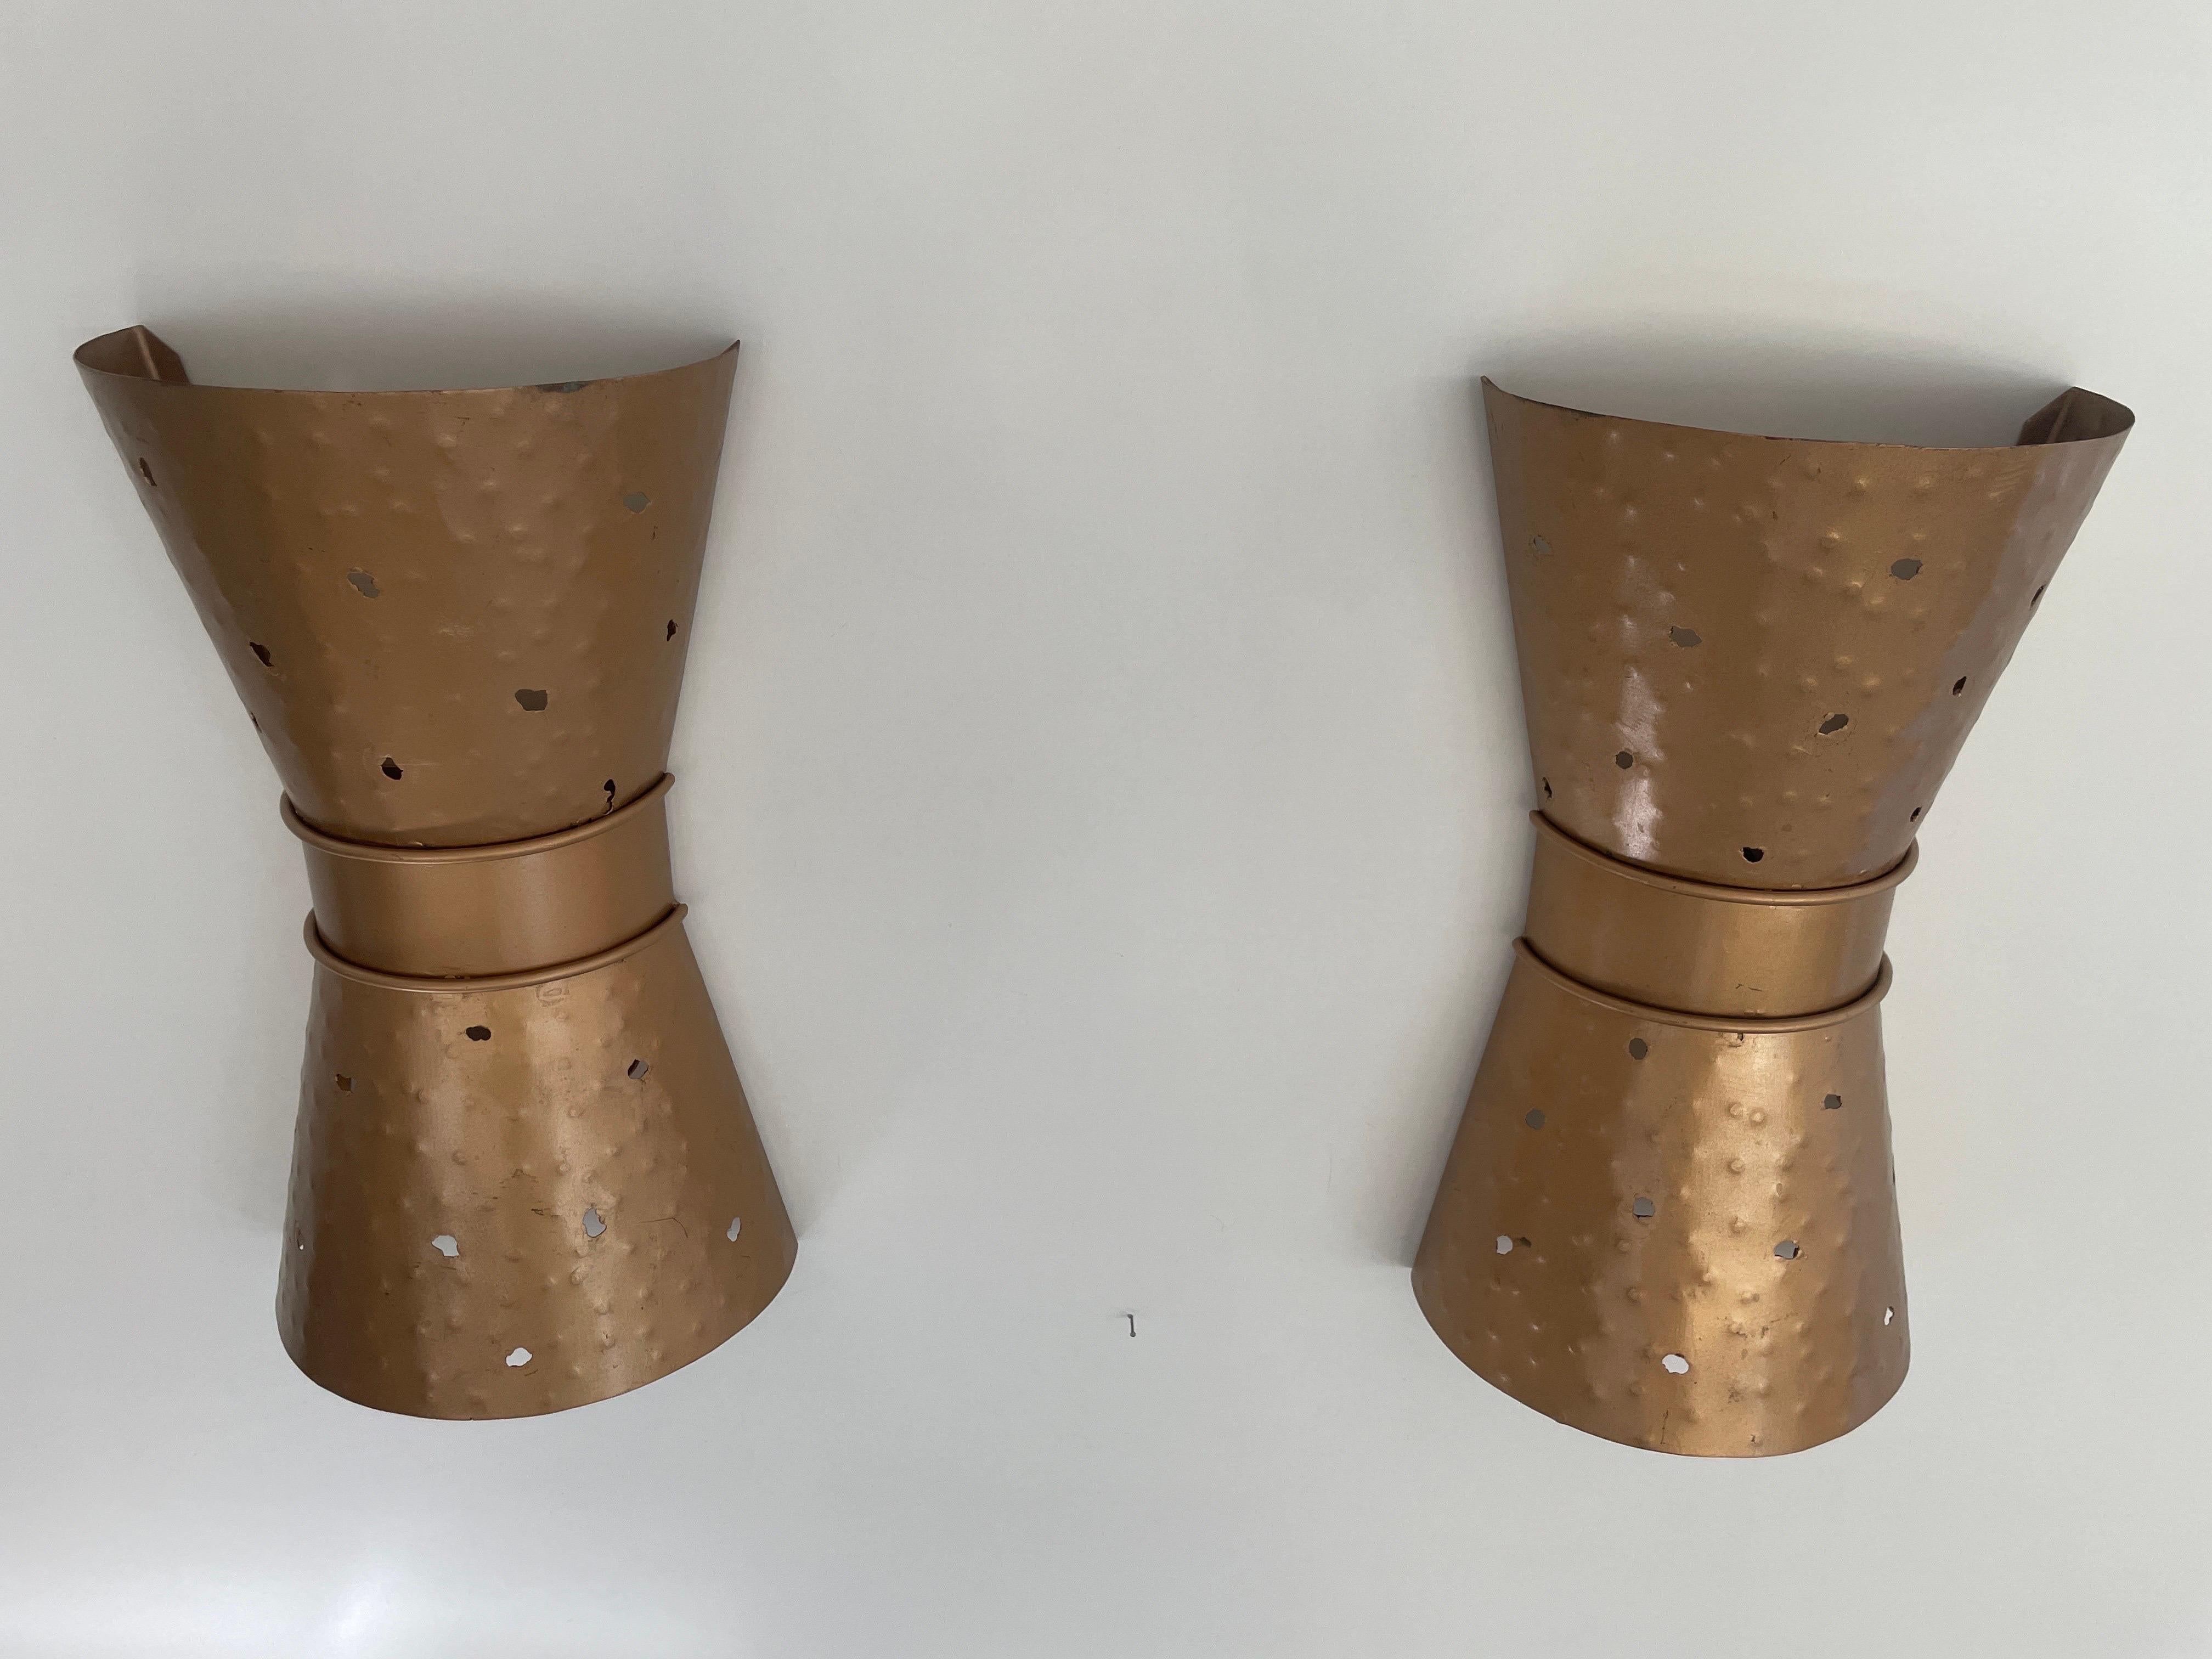 Diabolo Style Design Hand-crafted Pair of Sconces, 1970s, Germany

Very nice high quality wall lamps

Lamps are in very good vintage condition.

Note: 2 pair available.

These lamps works with 2x E27 standart light bulbs
Wired and suitable to use in